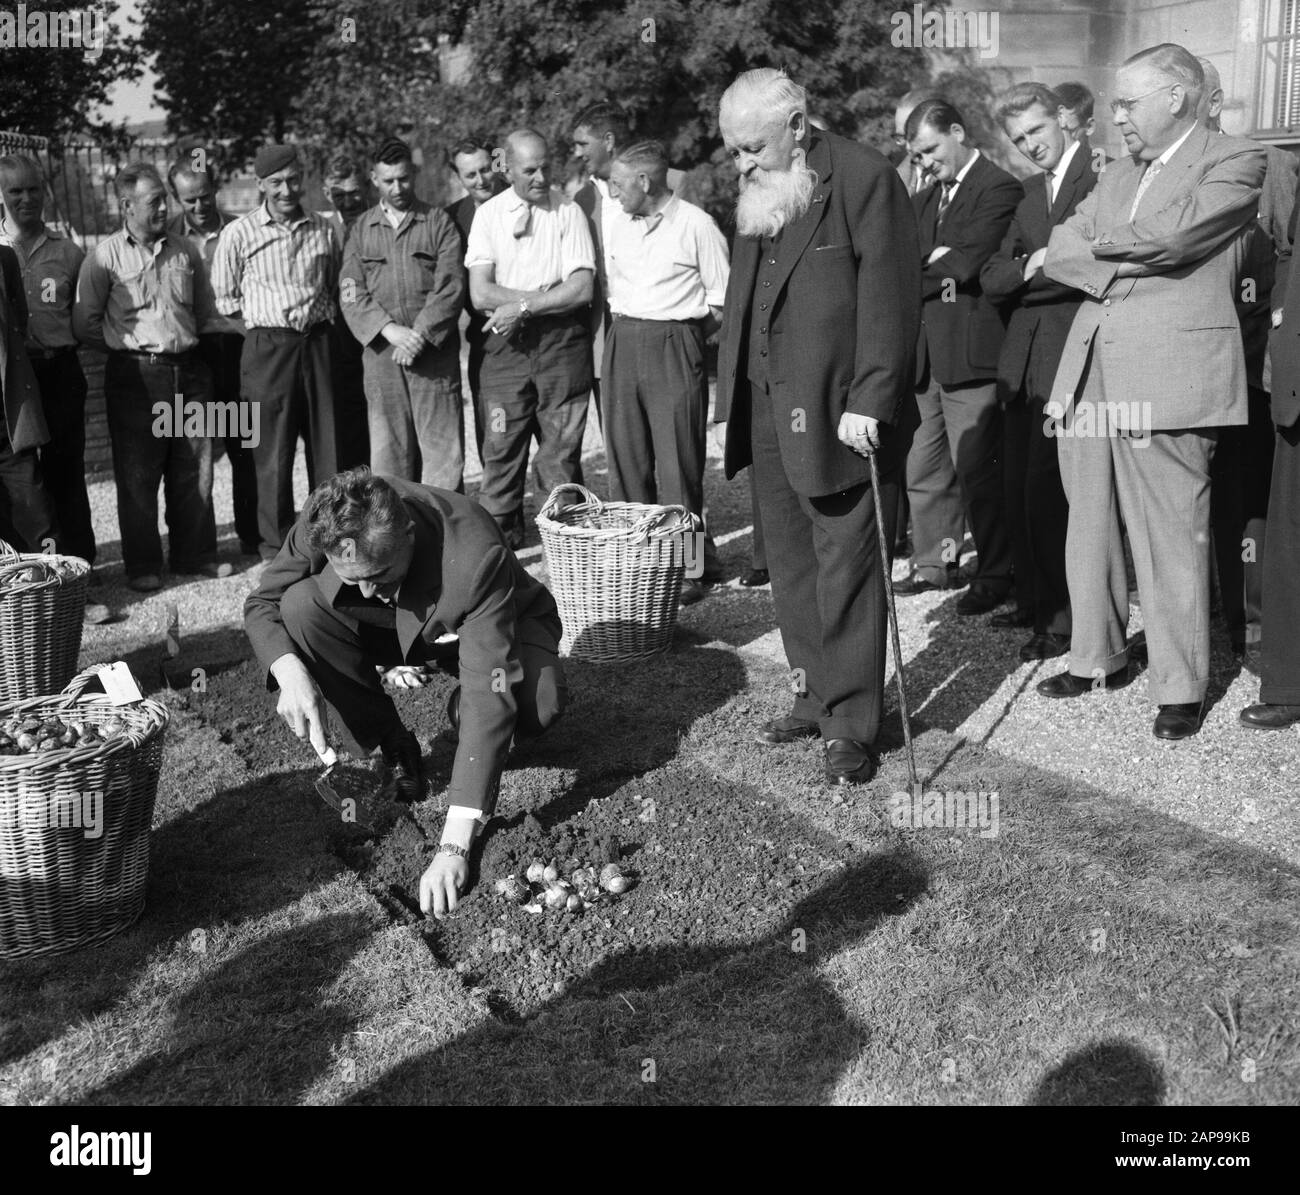 Floriade Rotterdam, 1960 Description: Beginning of planting 1.5 million bulbs for the Floriade at Rotterdam Date: 21 September 1959 Location: Rotterdam, South-Holland Keywords: bulbs, floriades, plants Institution name: Floriade Stock Photo